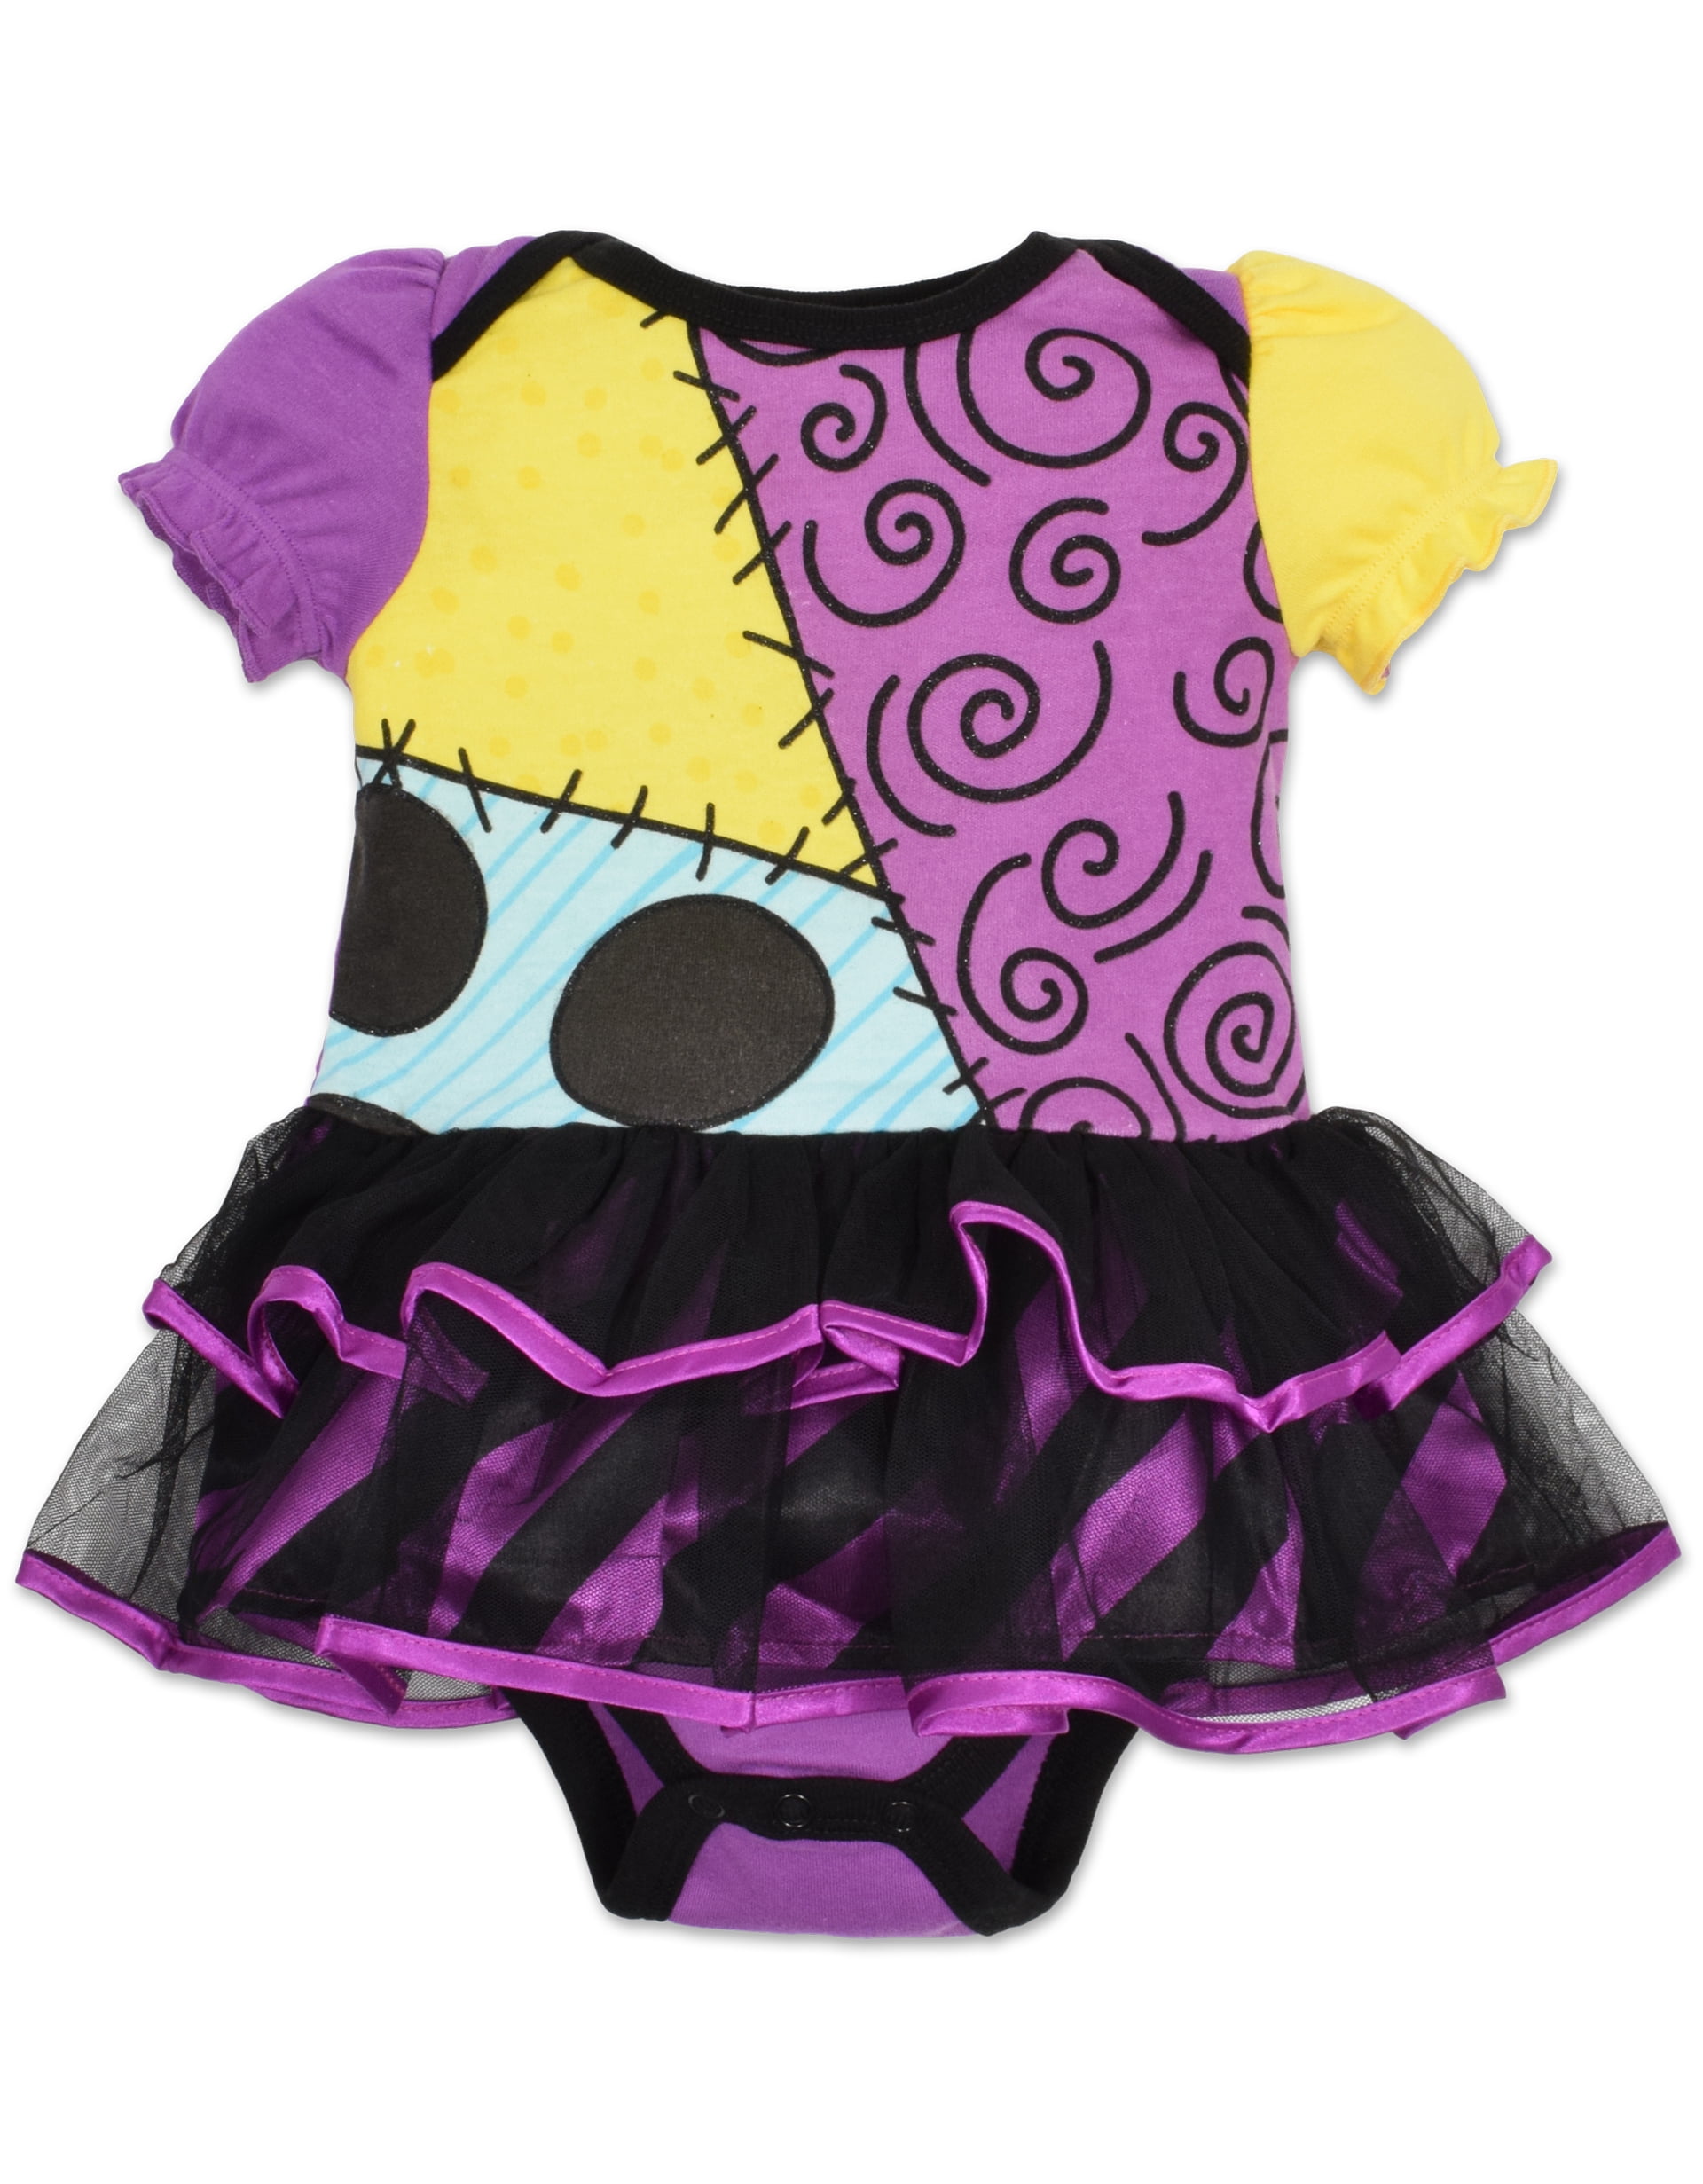 NEW The Nightmare Before Christmas Sally Infant Halloween Costume 6-12 Months 